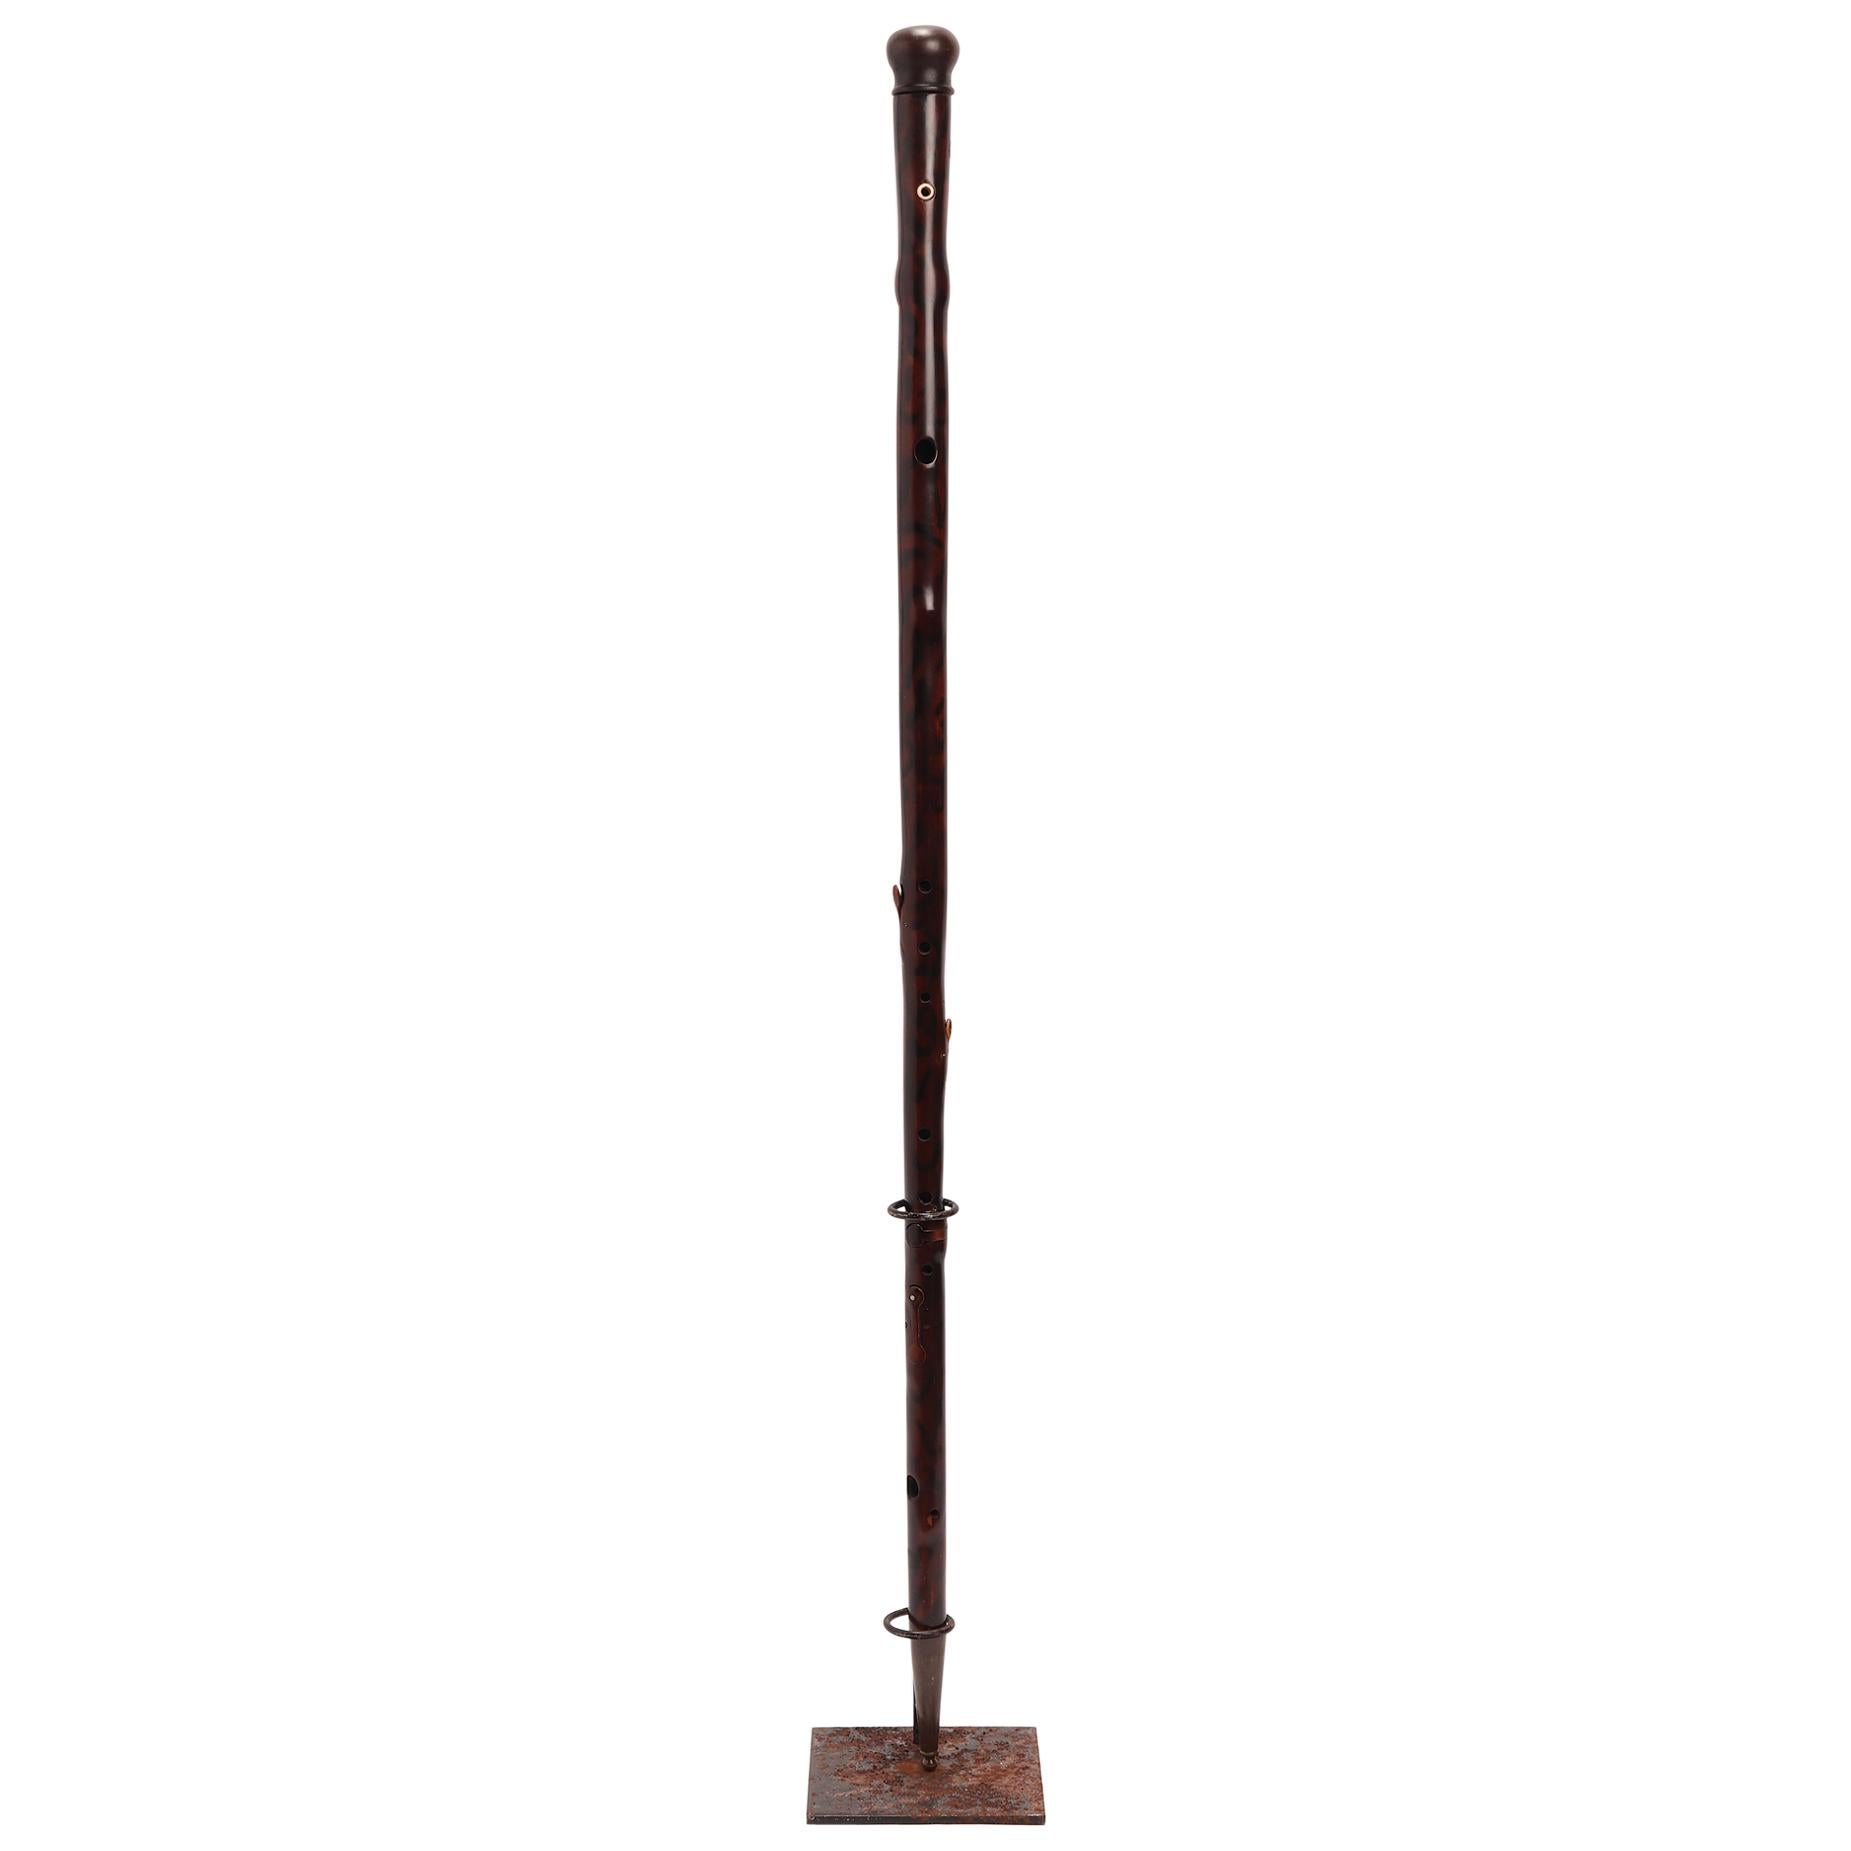 Gadget-system walking stick: stick with the function of a music instrument, a flute. Painted fruitwood shaft, wooden handle. Inside the shaft is hollow, and holes and keys allow to play music once the handle is taken apart. Ferrule made out of brass